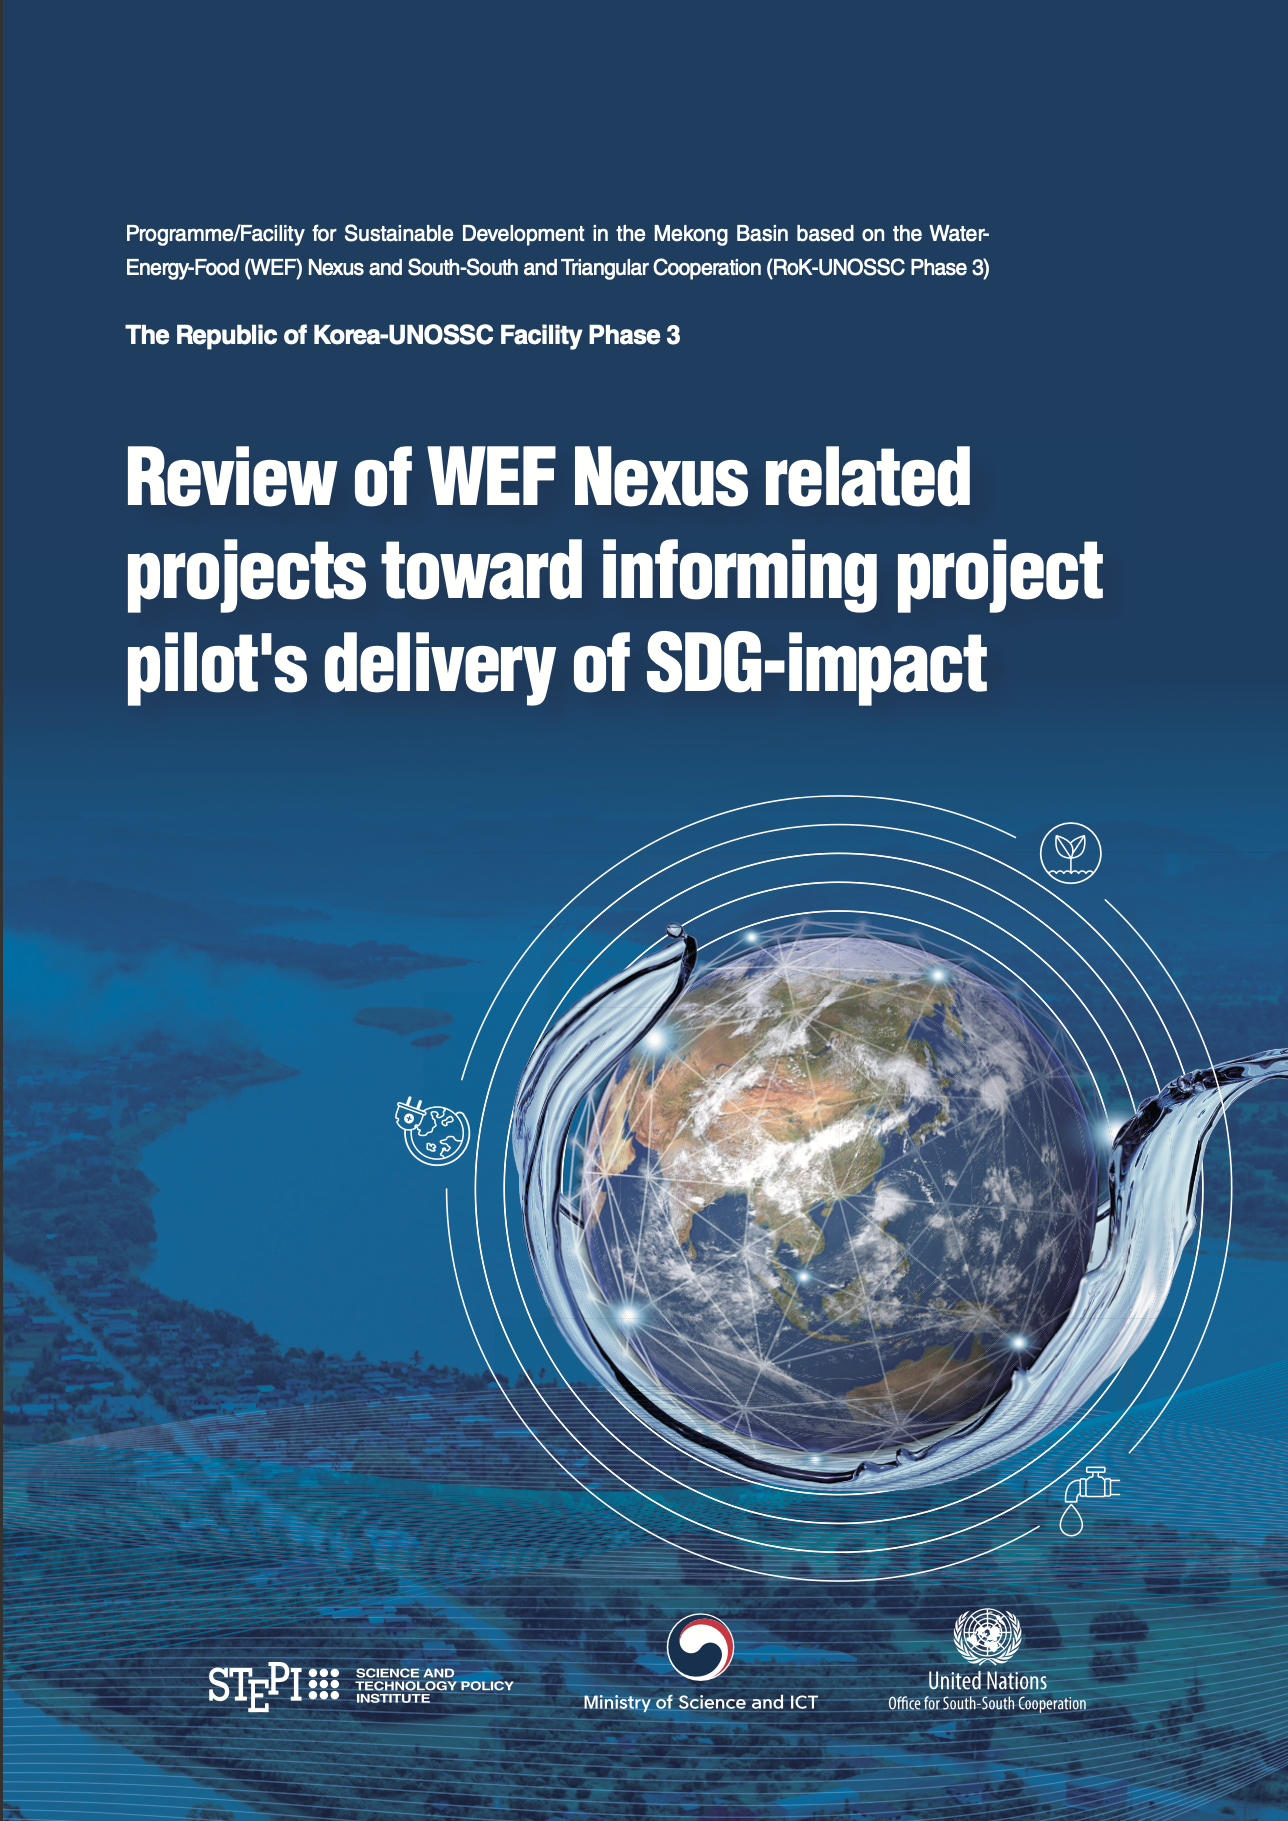 Review of Water-Energy-Food (WEF) Nexus Related Projects Toward Informing Project Pilot’s Delivery of SDG-Impact